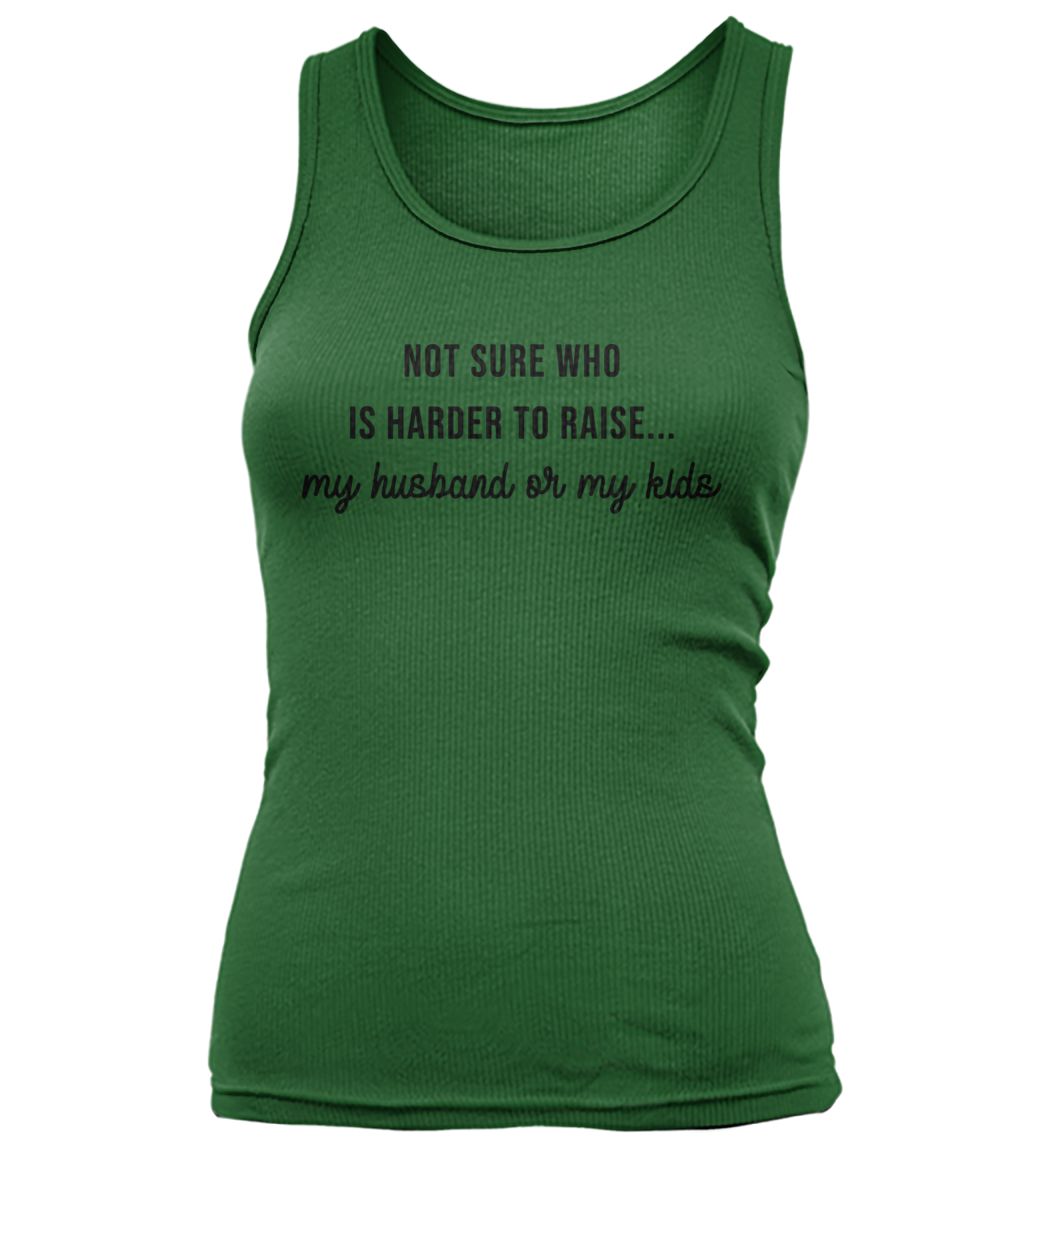 Not sure who is harder to raise my husband or my kids women's tank top